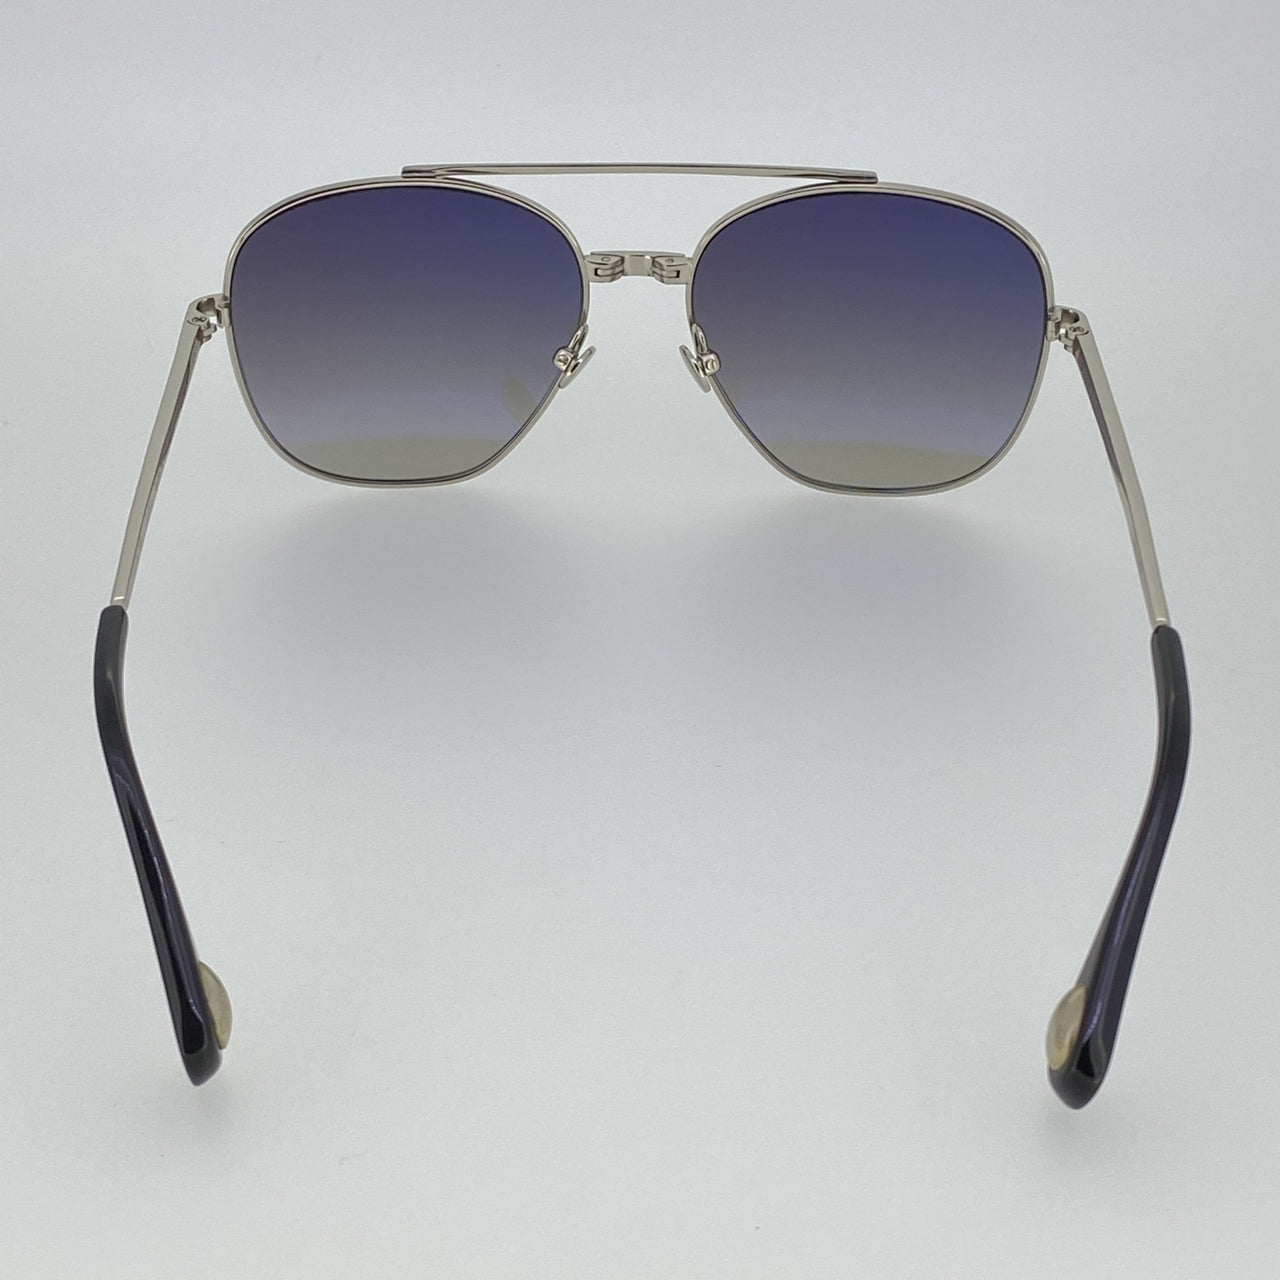 Ann Demeulemeester Sunglasses Brushed Silver tone Titanium Frame 925 Silver AD12C1SUN - Watches & Crystals